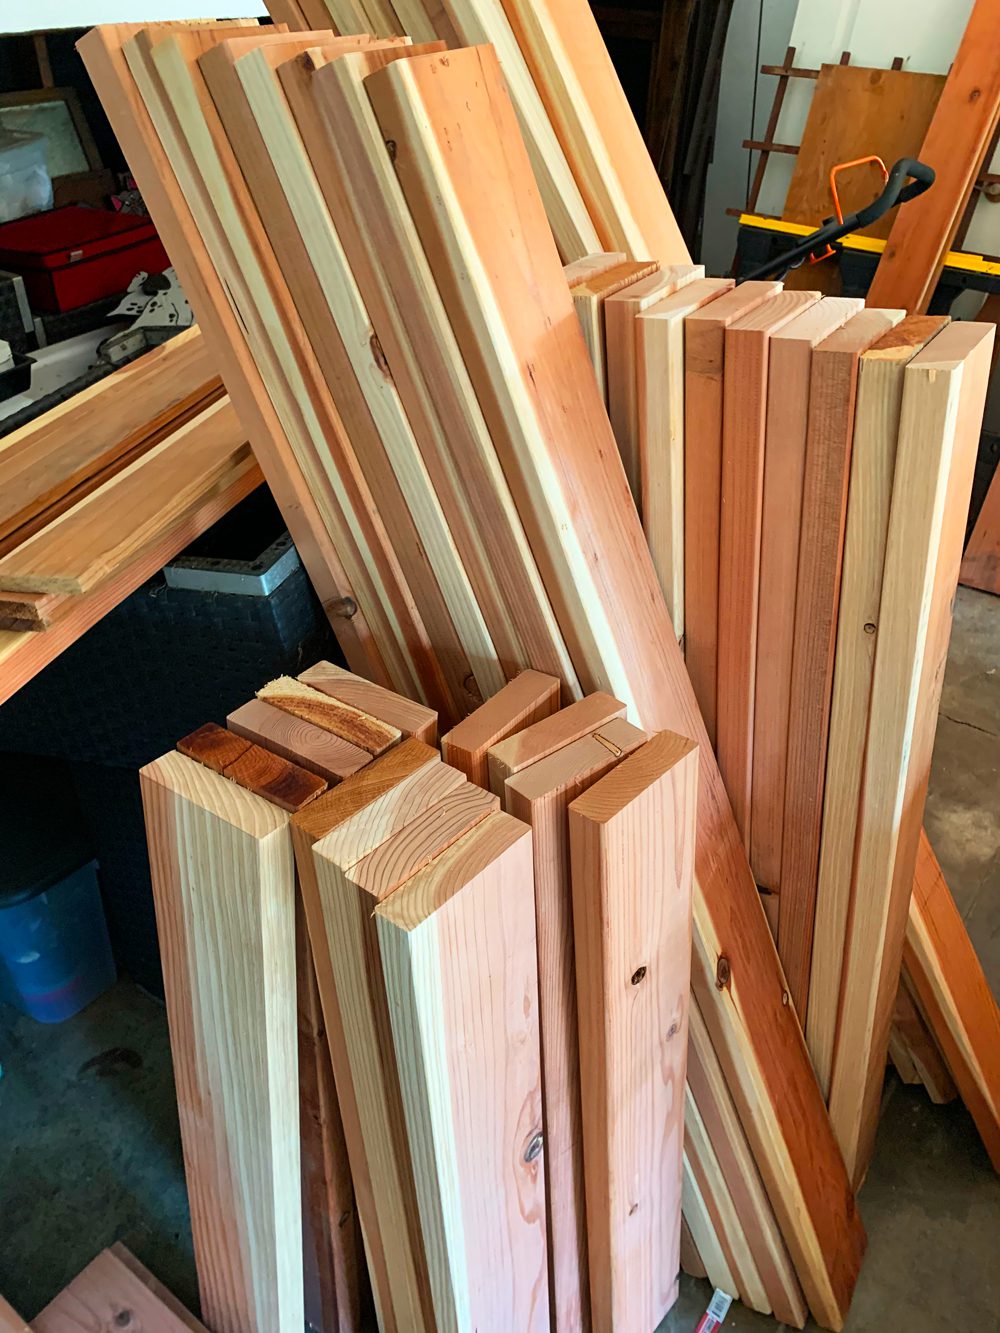 Redwood lumber cut-to-size for custom kitchen garden beds in the Heirloom Potager workshop